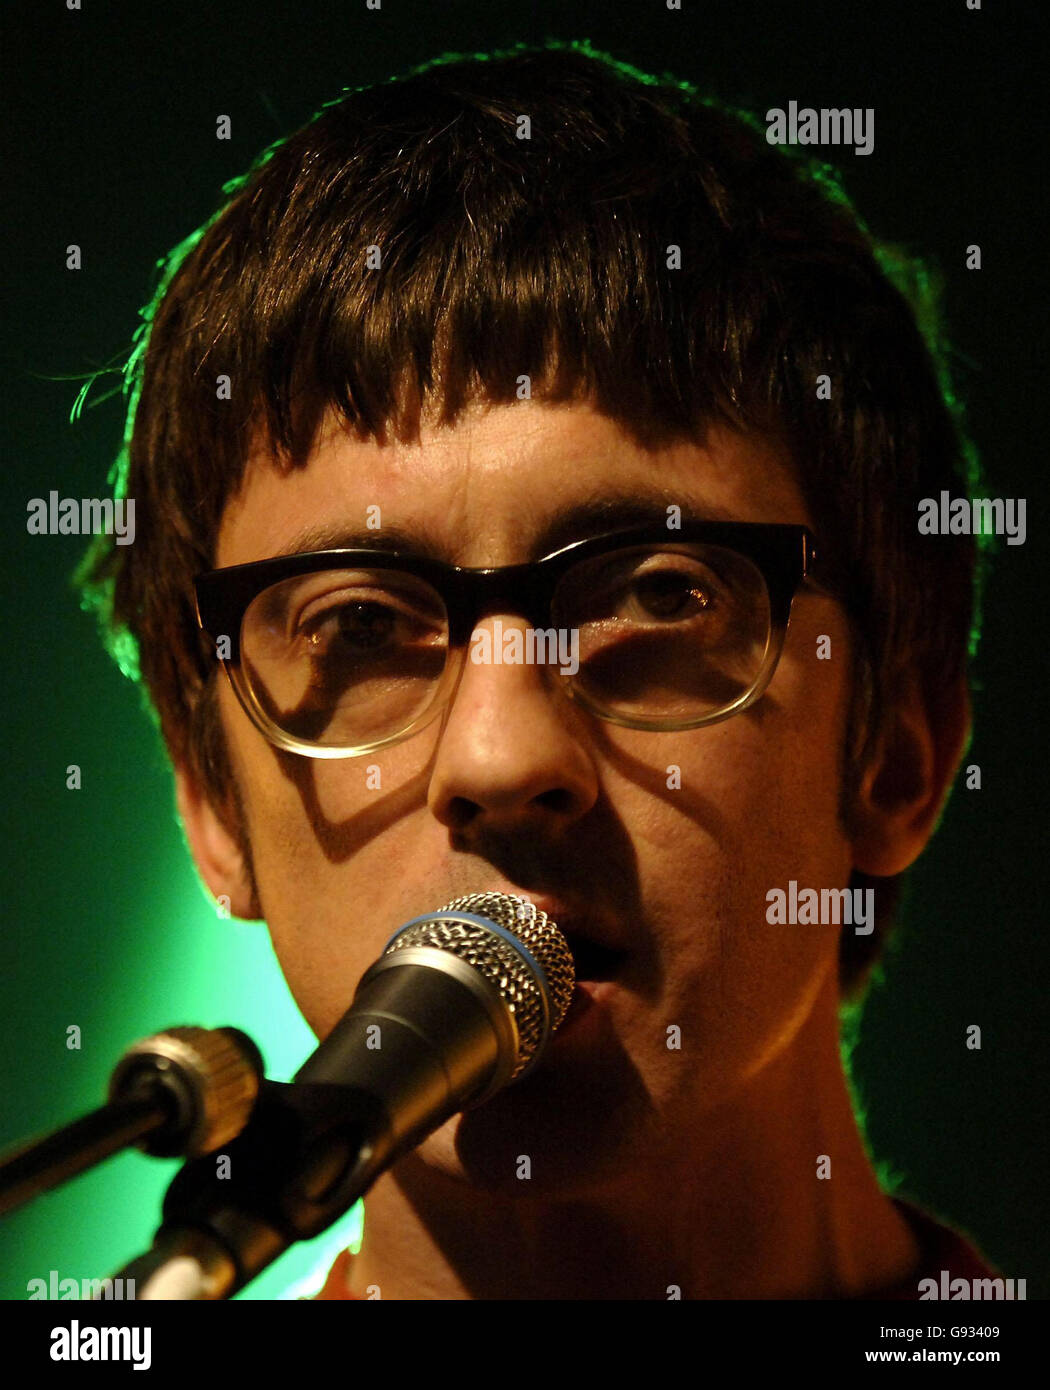 Graham Coxon performs live at the Carling New Kings concert, at the Carling Academy, Islington, north London, Thursday 12 January 2006. PRESS ASSOCIATION Photo. Photo credit should read: Yui Mok/PA Stock Photo